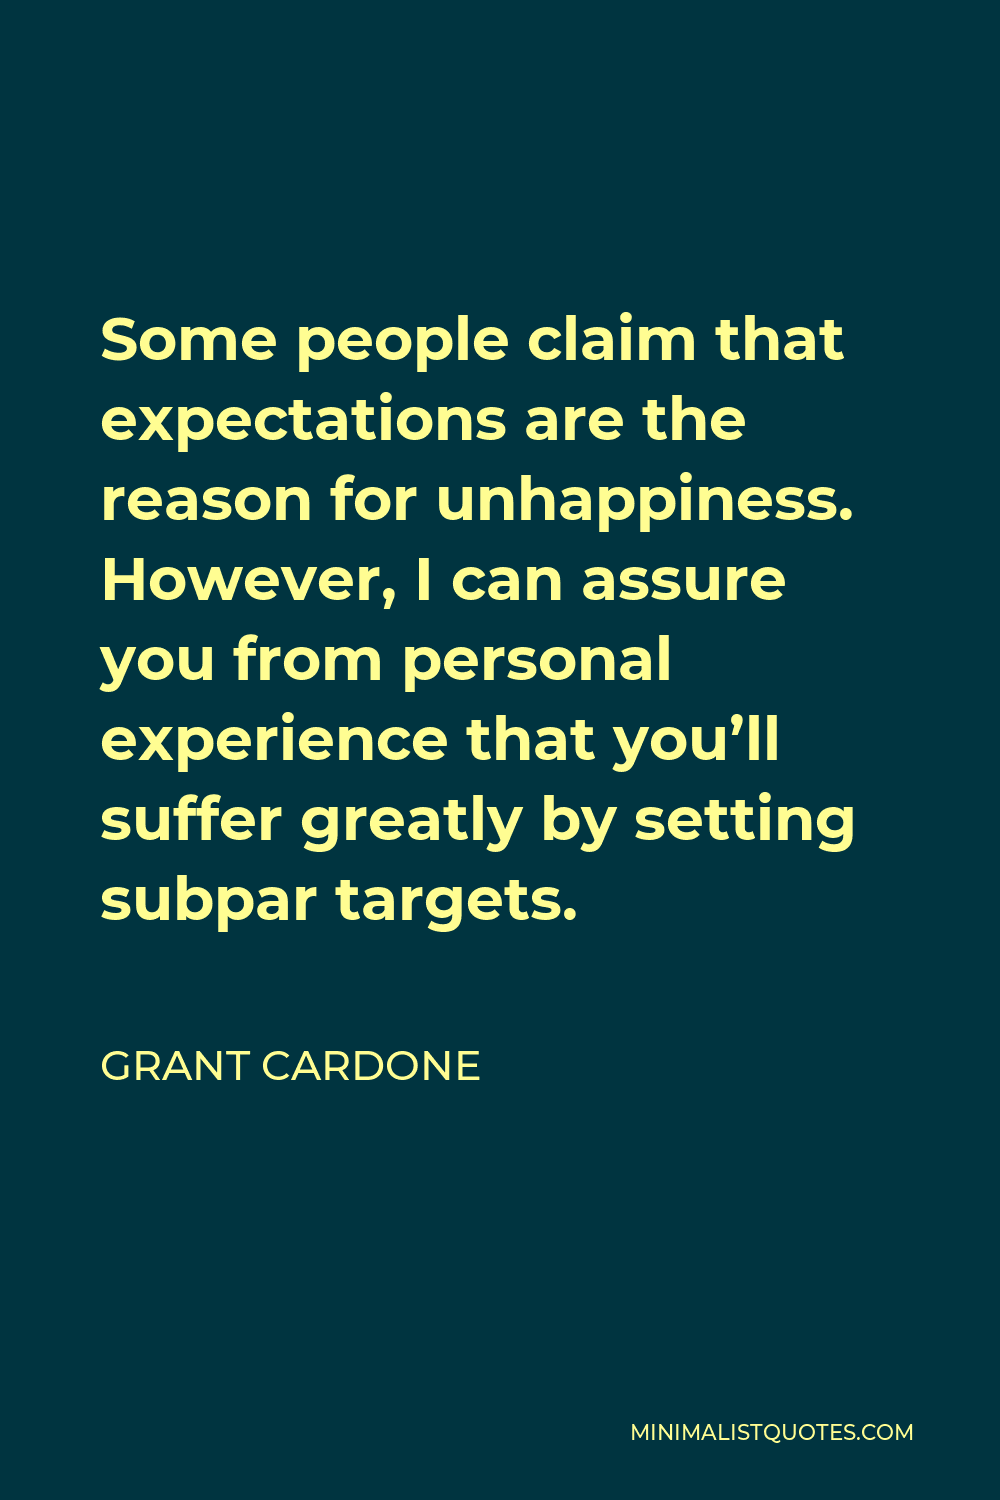 Grant Cardone Quote - Some people claim that expectations are the reason for unhappiness. However, I can assure you from personal experience that you’ll suffer greatly by setting subpar targets.